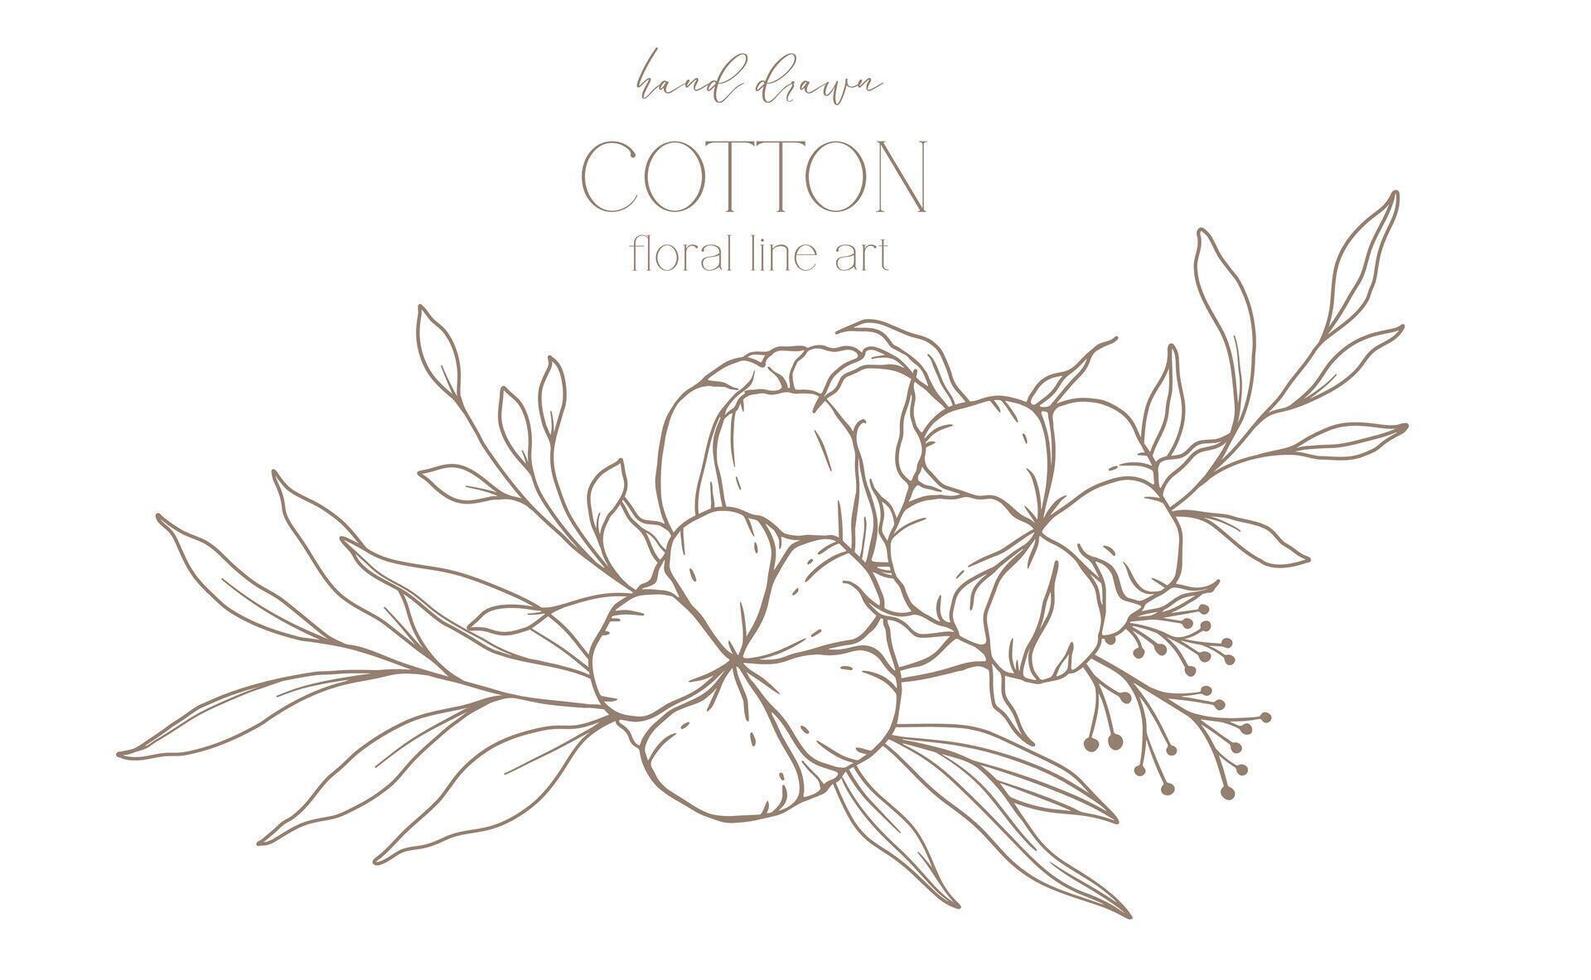 Hand Drawn Cotton Flowers Line Art Illustration. Cotton Balls isolated on white. Floral Line Art. Cotton Plant Black and white illustration. Fine Line Cotton illustration. vector